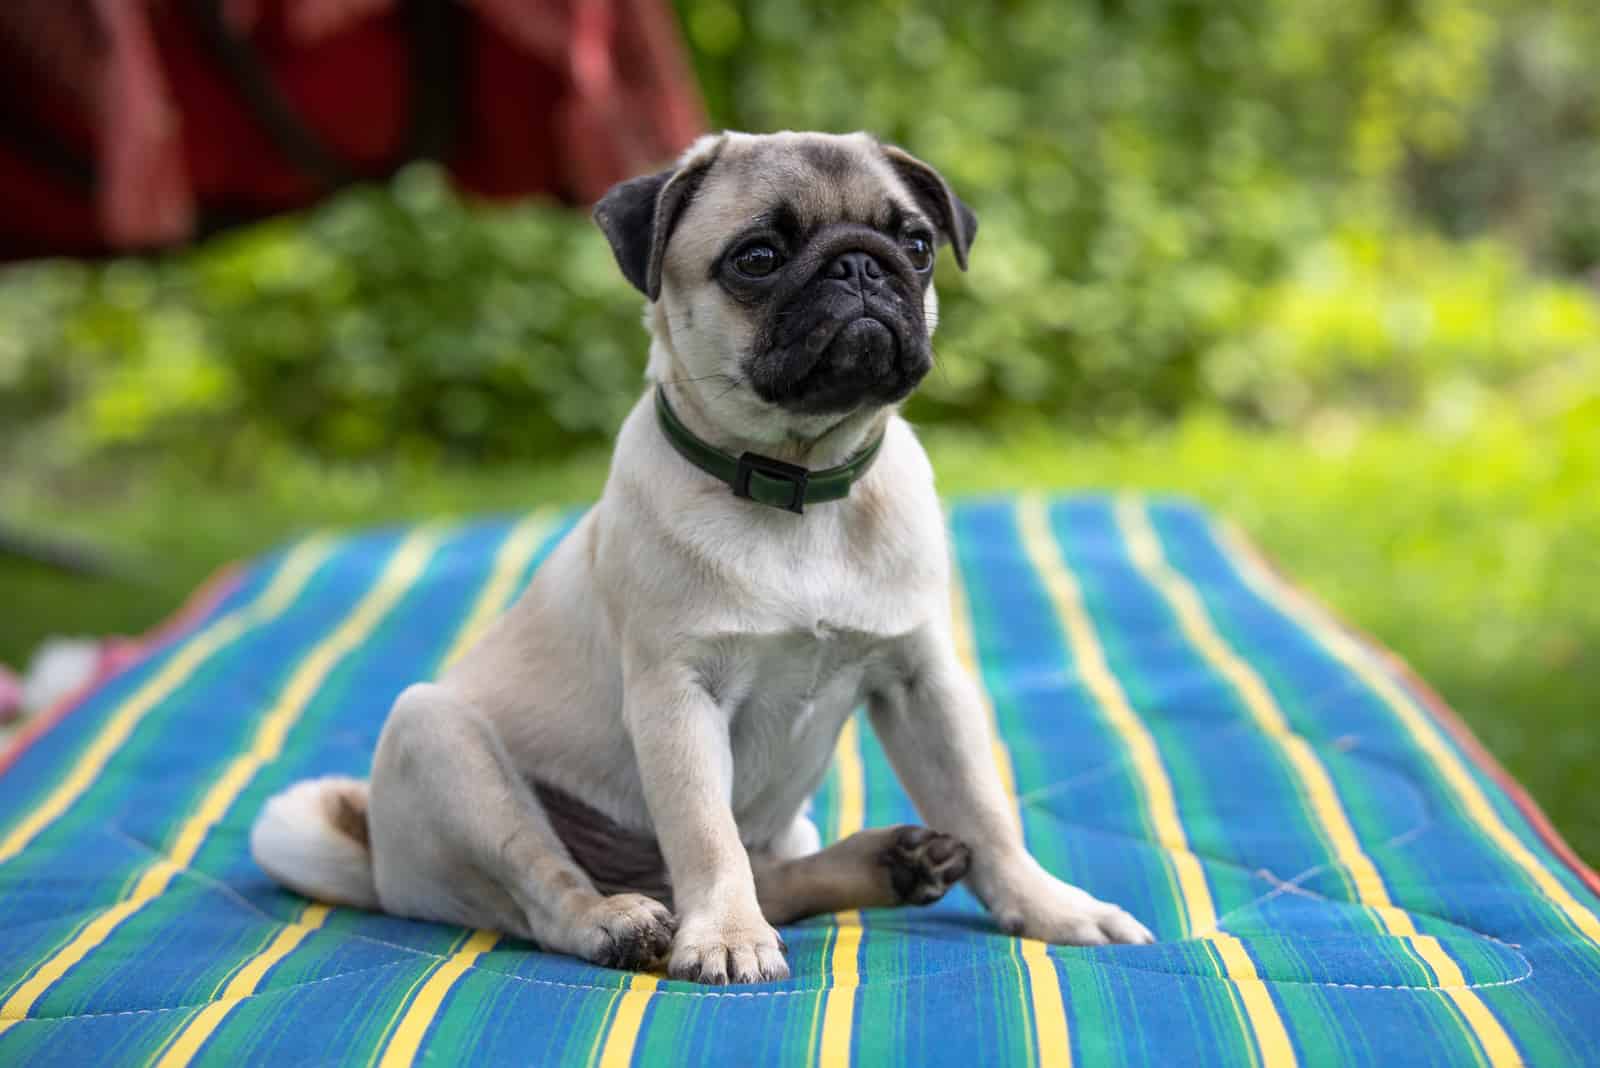 6 Best Collars For Pugs: What To Look Out For